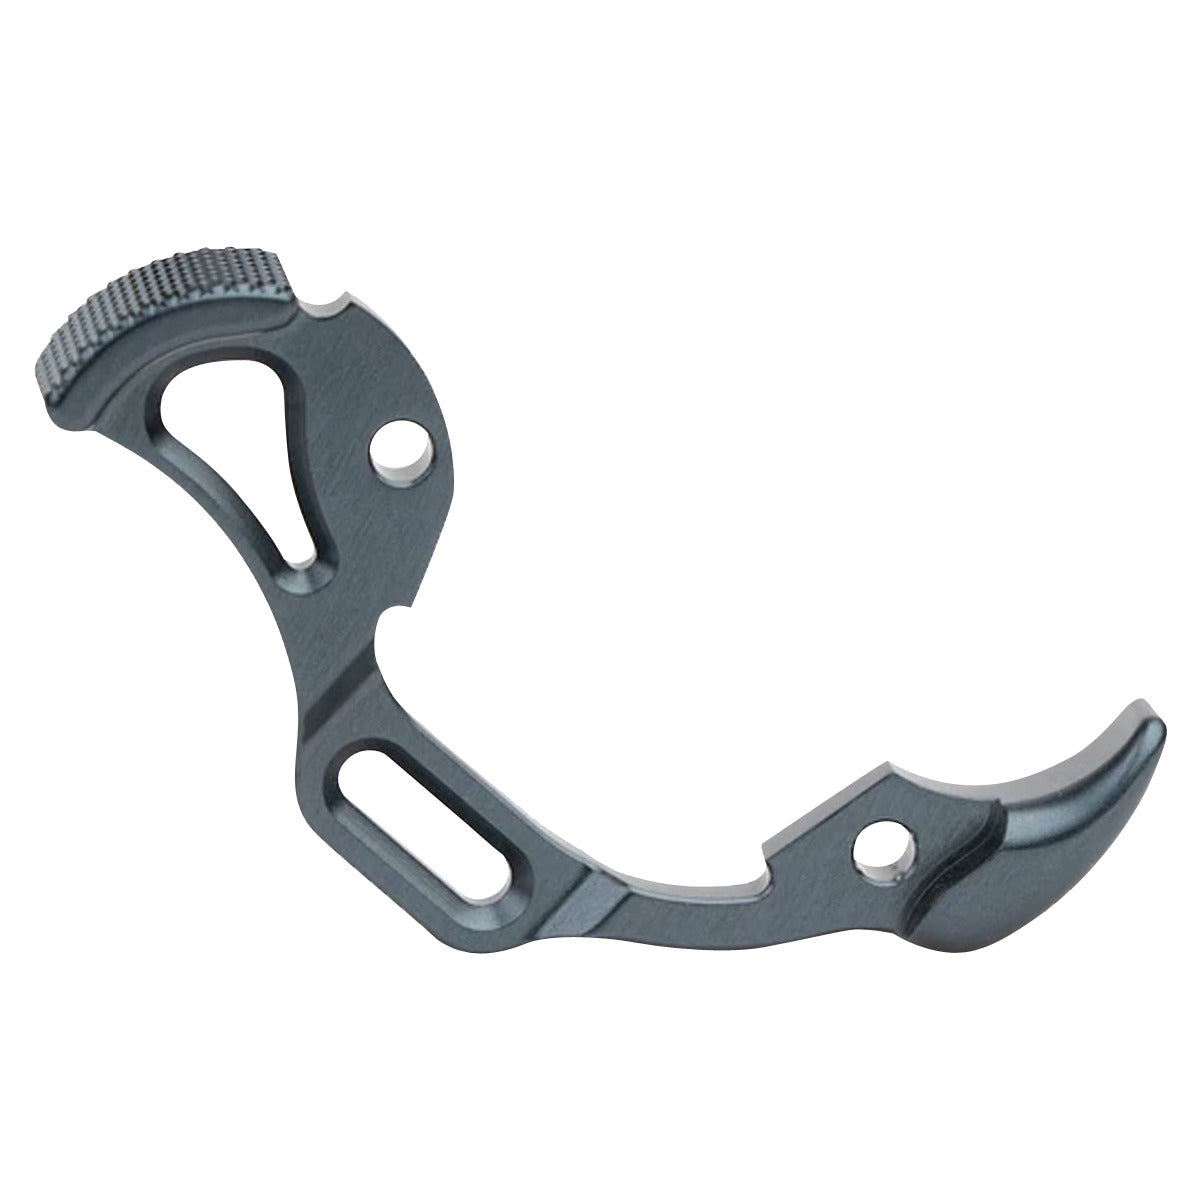 Ultraview Archery The Hinge - Hunting Bracket in  by GOHUNT | Ultraview Archery - GOHUNT Shop